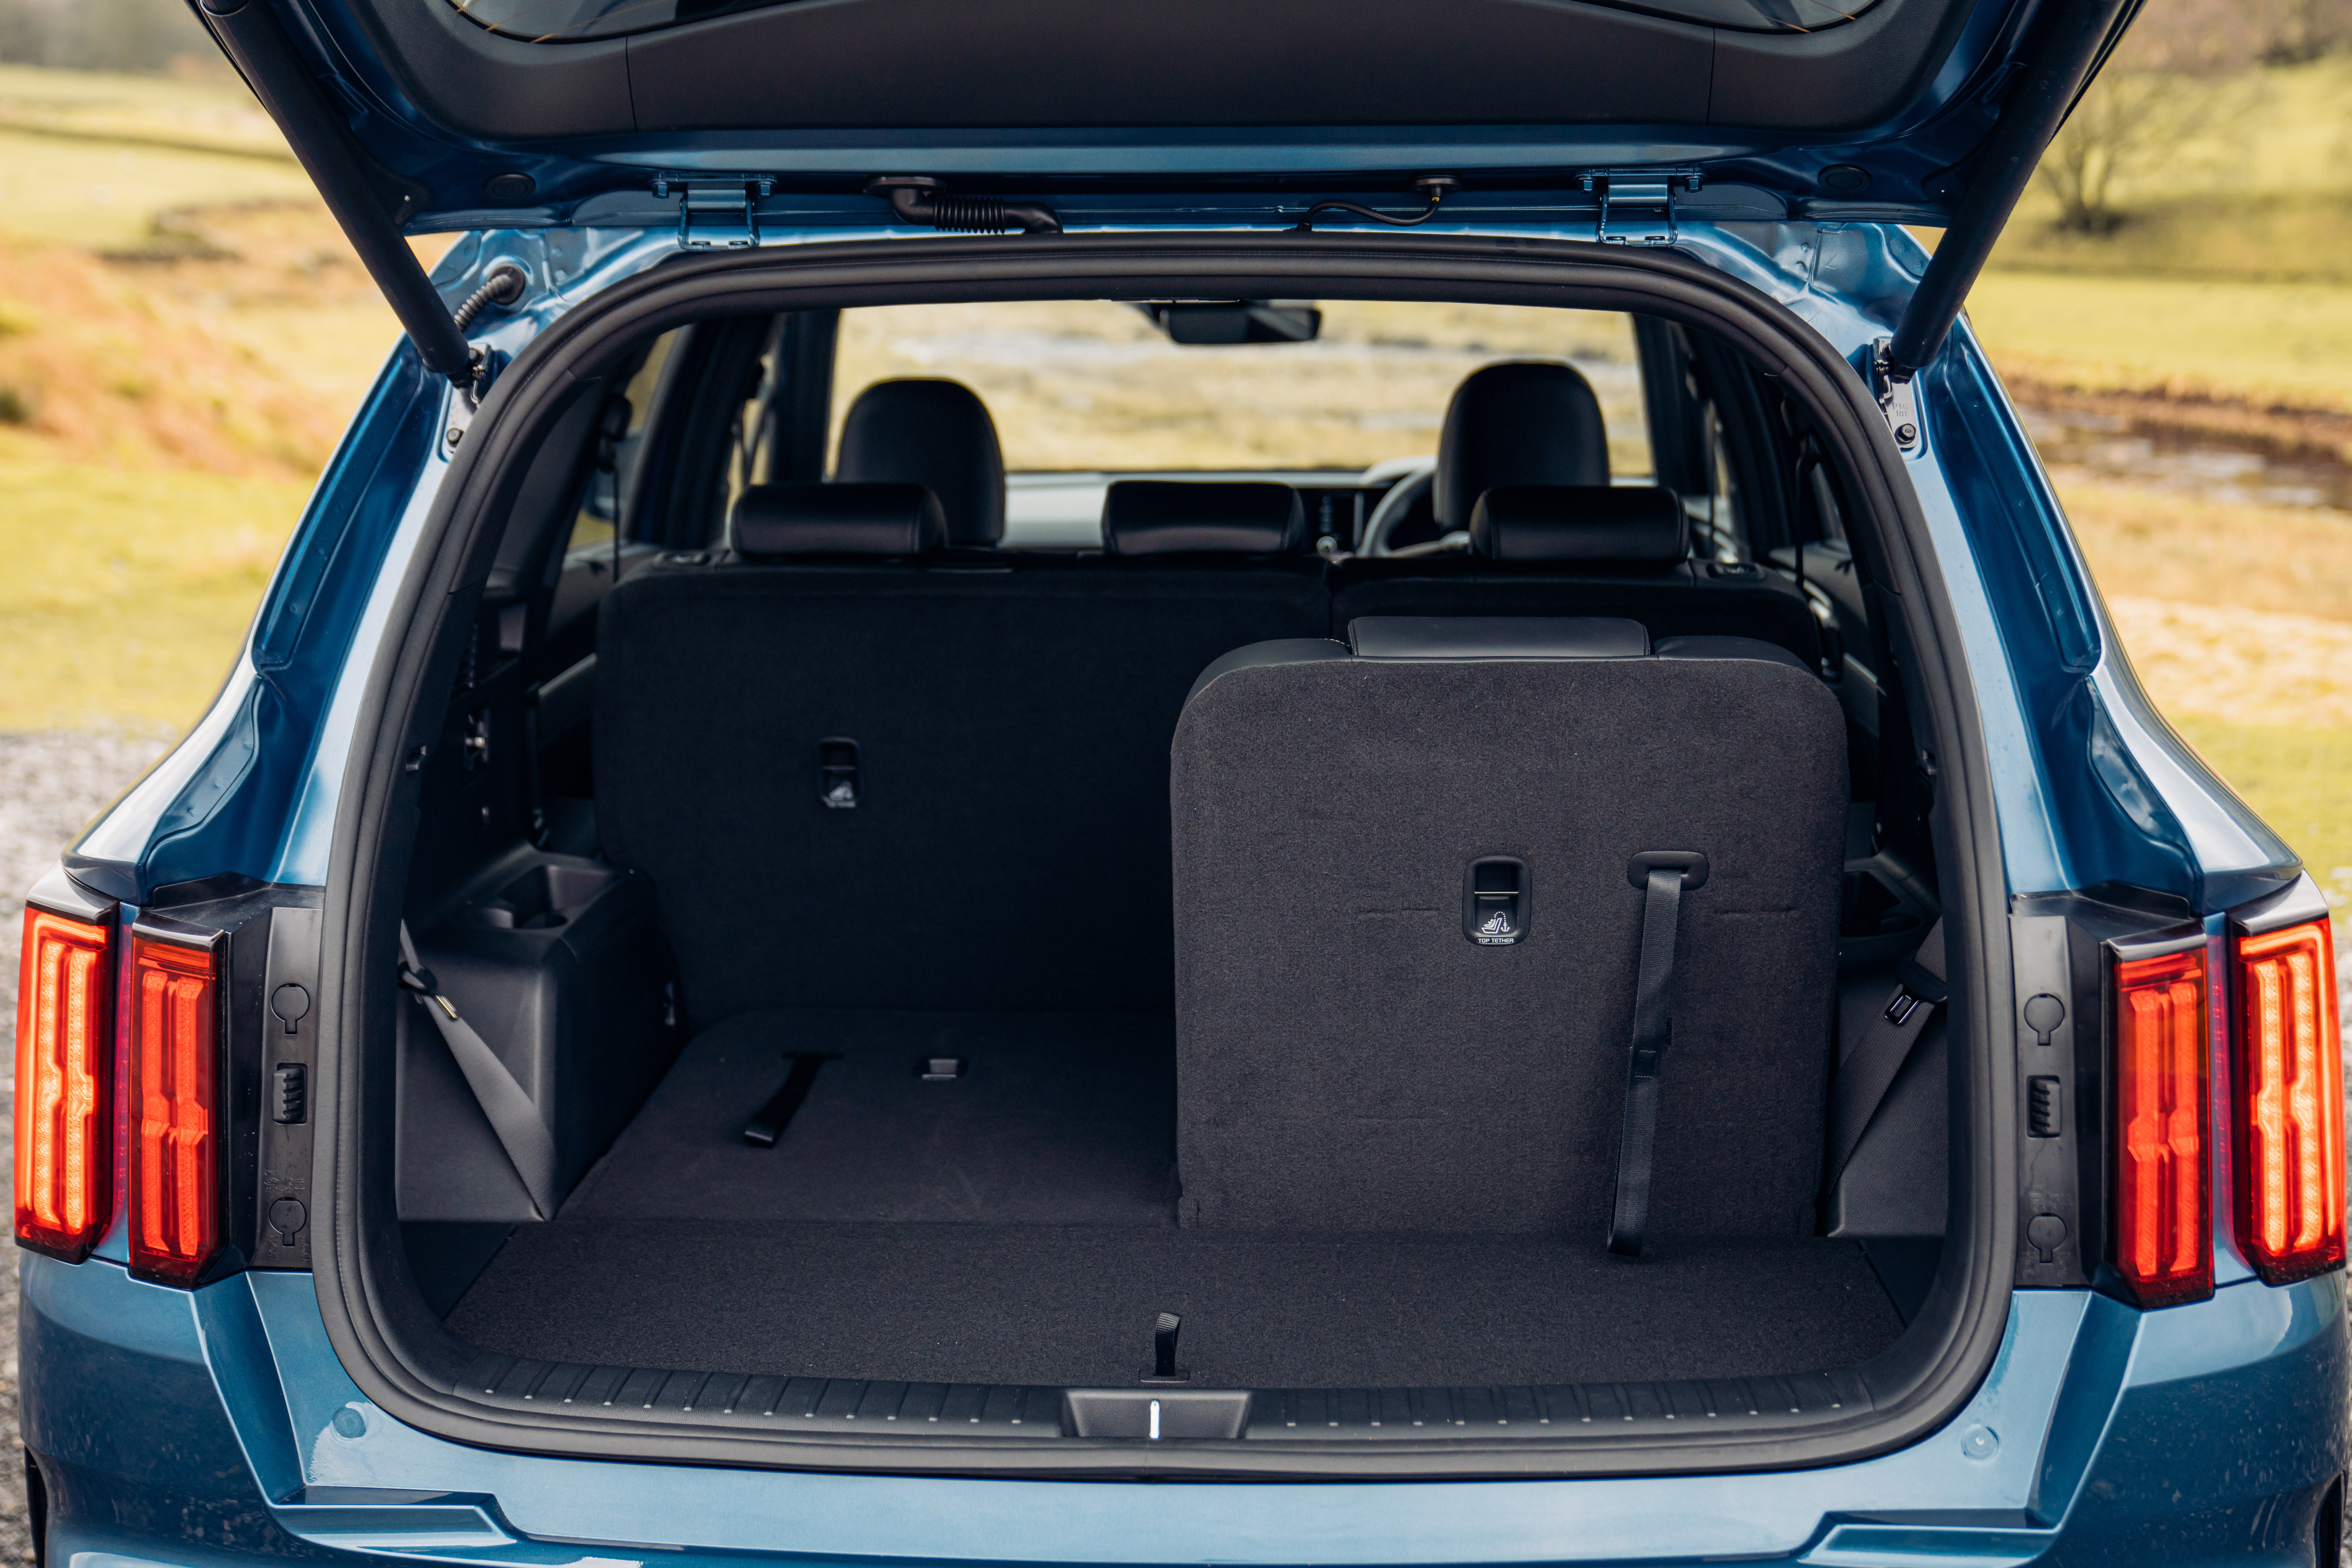 The Sorento is a seven-seater, with the option of one or two retractable jump seats for kids in the boot